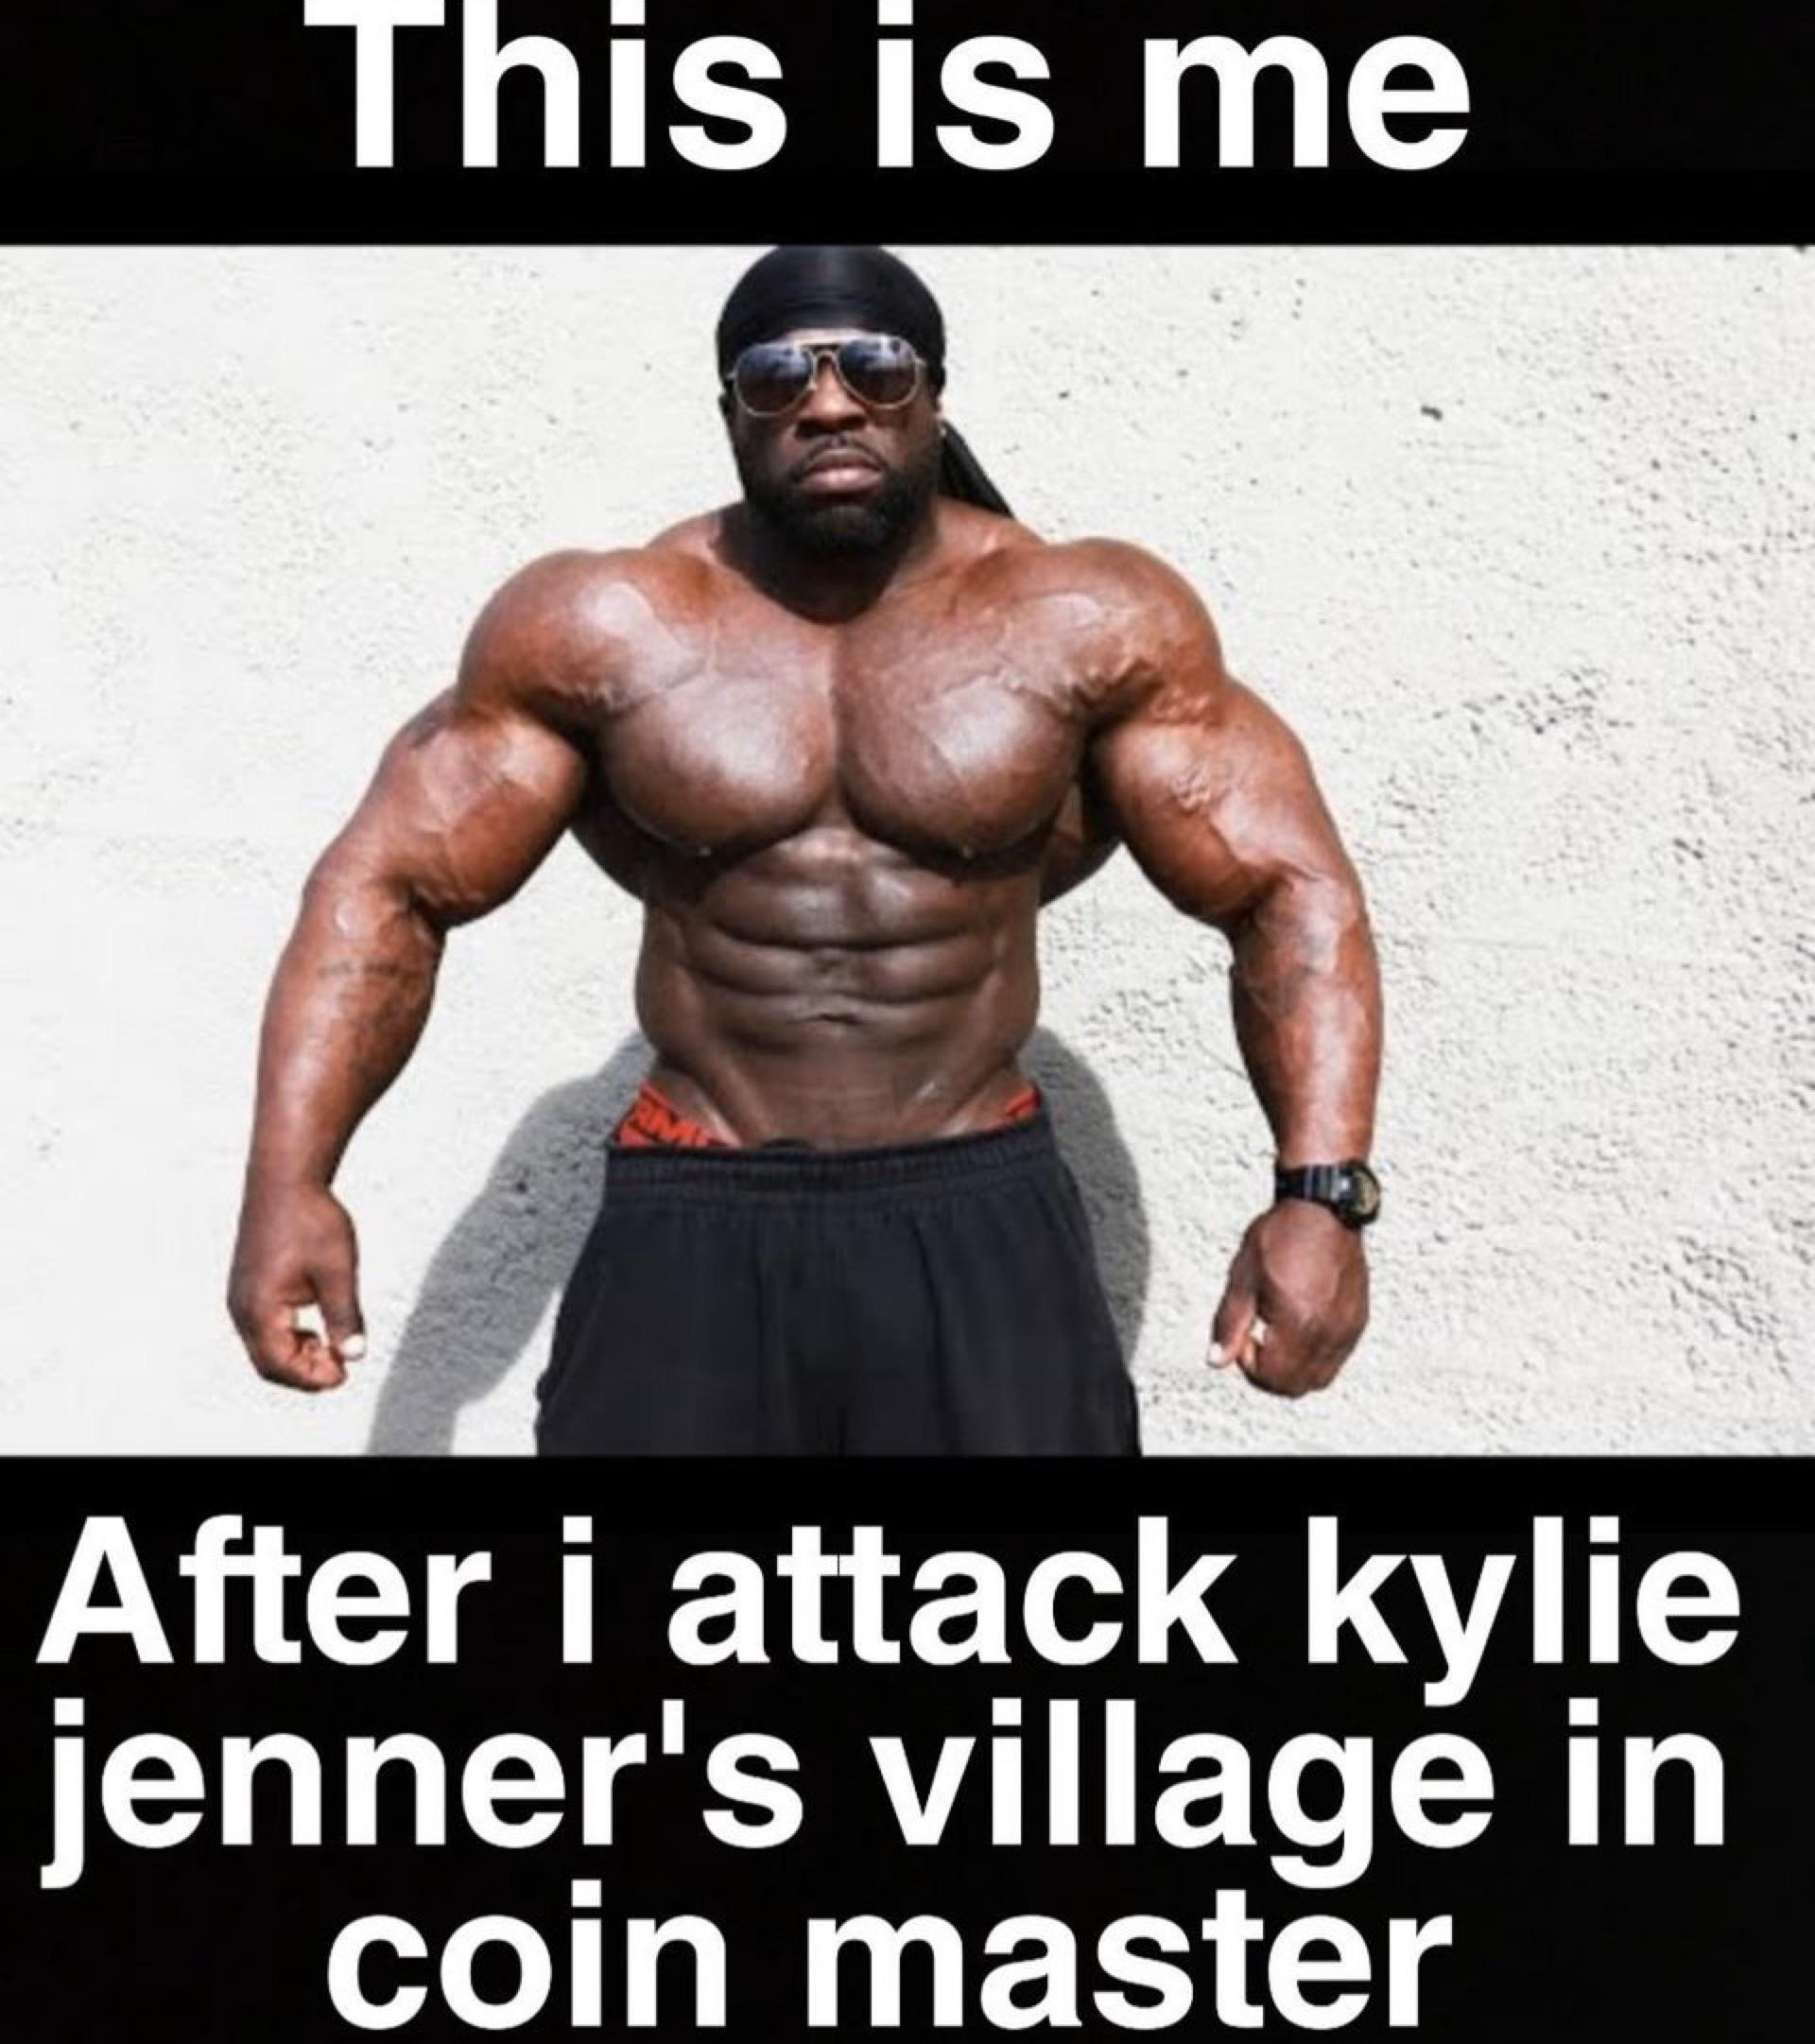 dank memes - swole dude - This is me After i attack kylie jenner's village in coin master